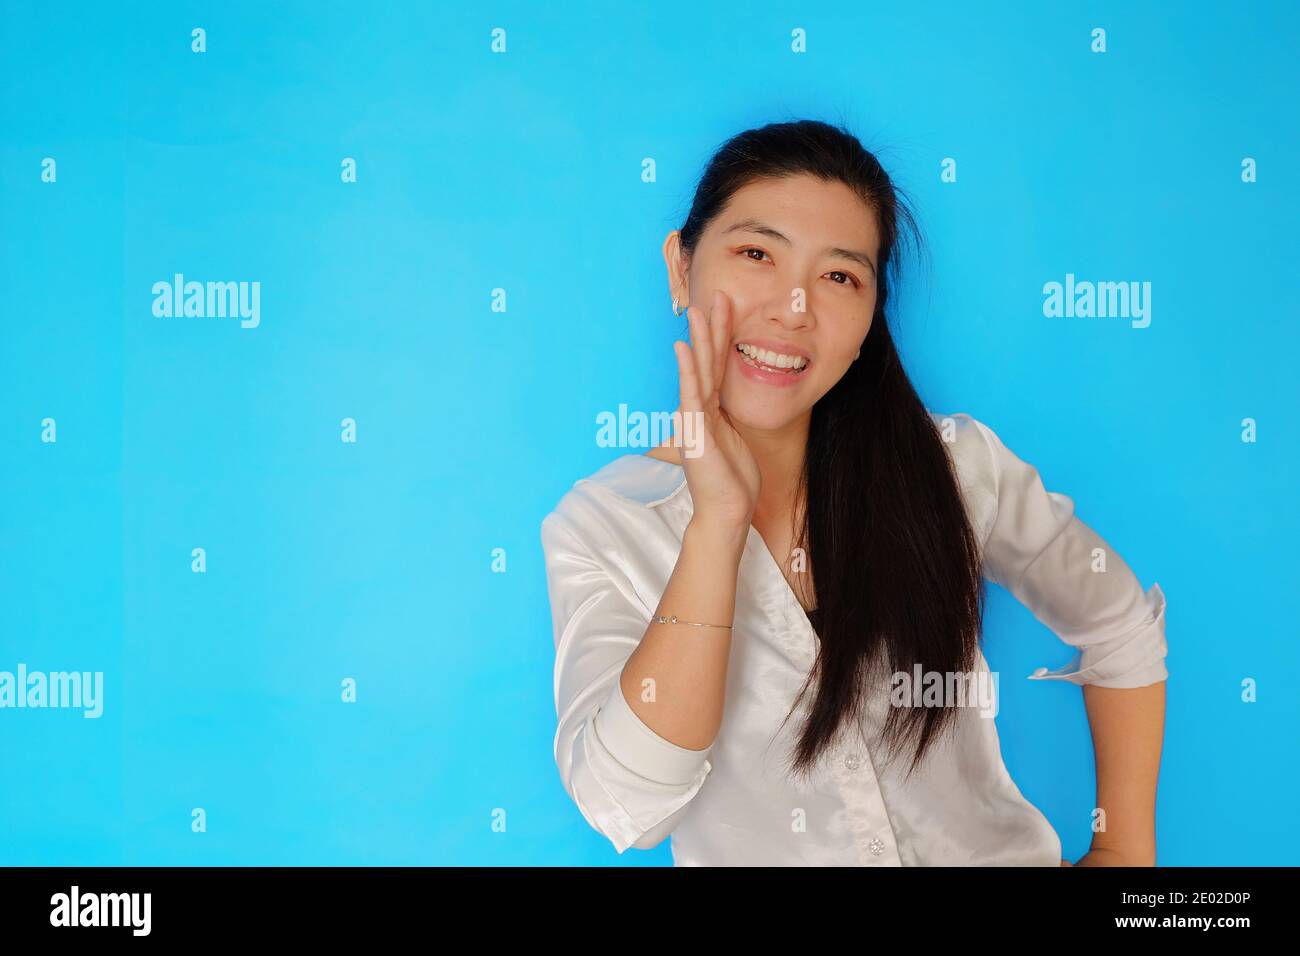 An attractive Asian woman telling a secret by whispering the news quietly, playfully holding her hand close to her mouth, smiling and happy with plain Stock Photo